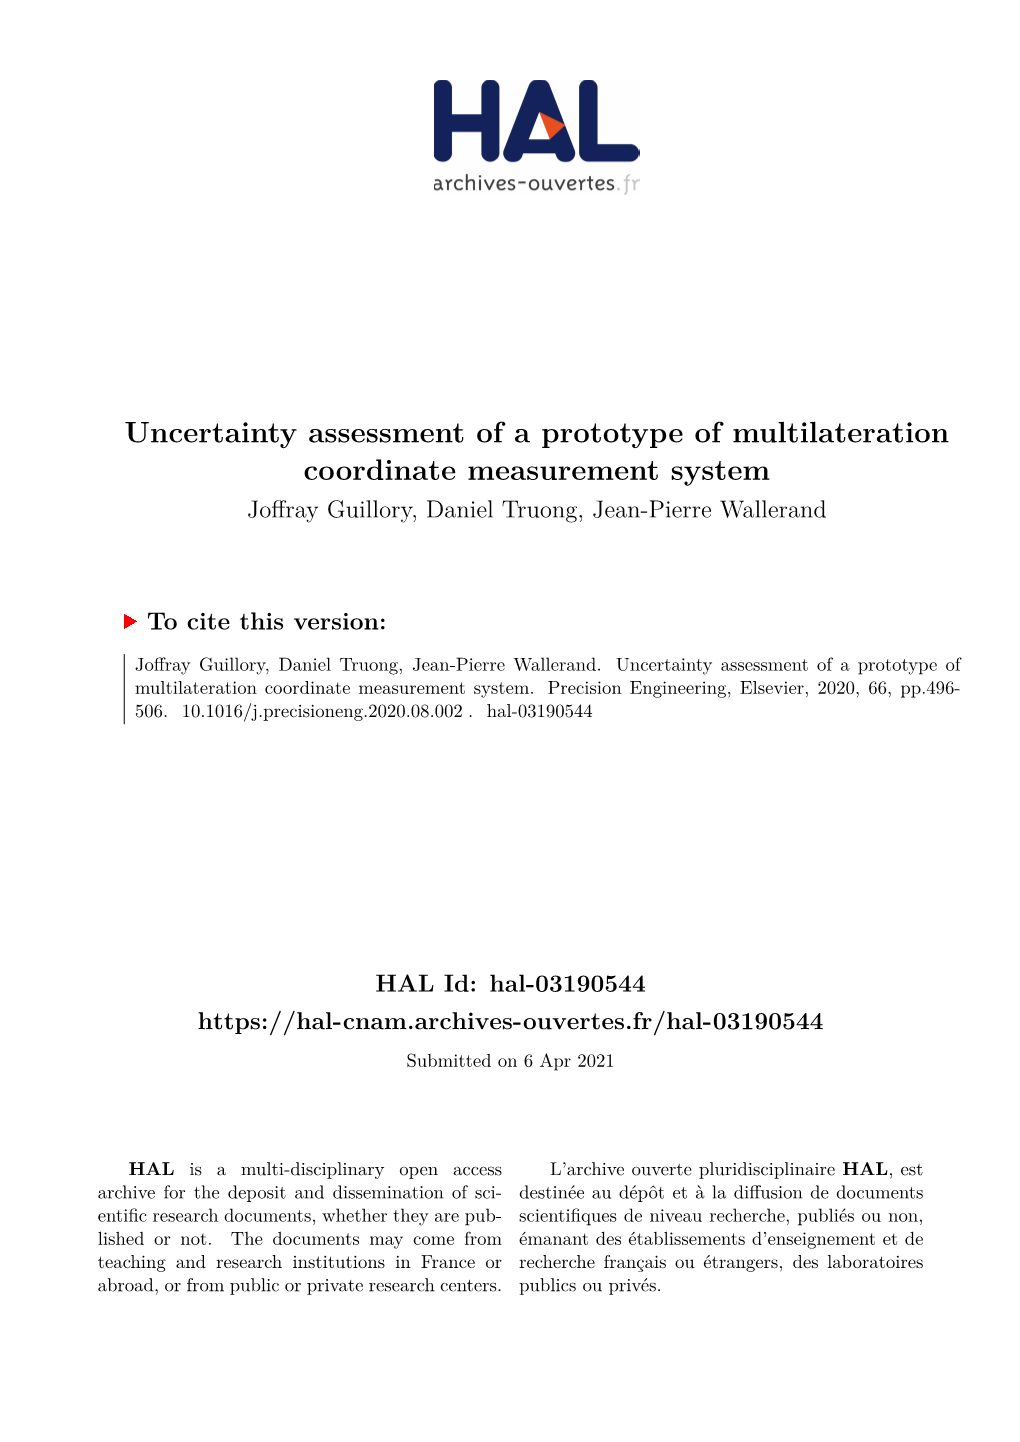 Uncertainty Assessment of a Prototype of Multilateration Coordinate Measurement System Joffray Guillory, Daniel Truong, Jean-Pierre Wallerand